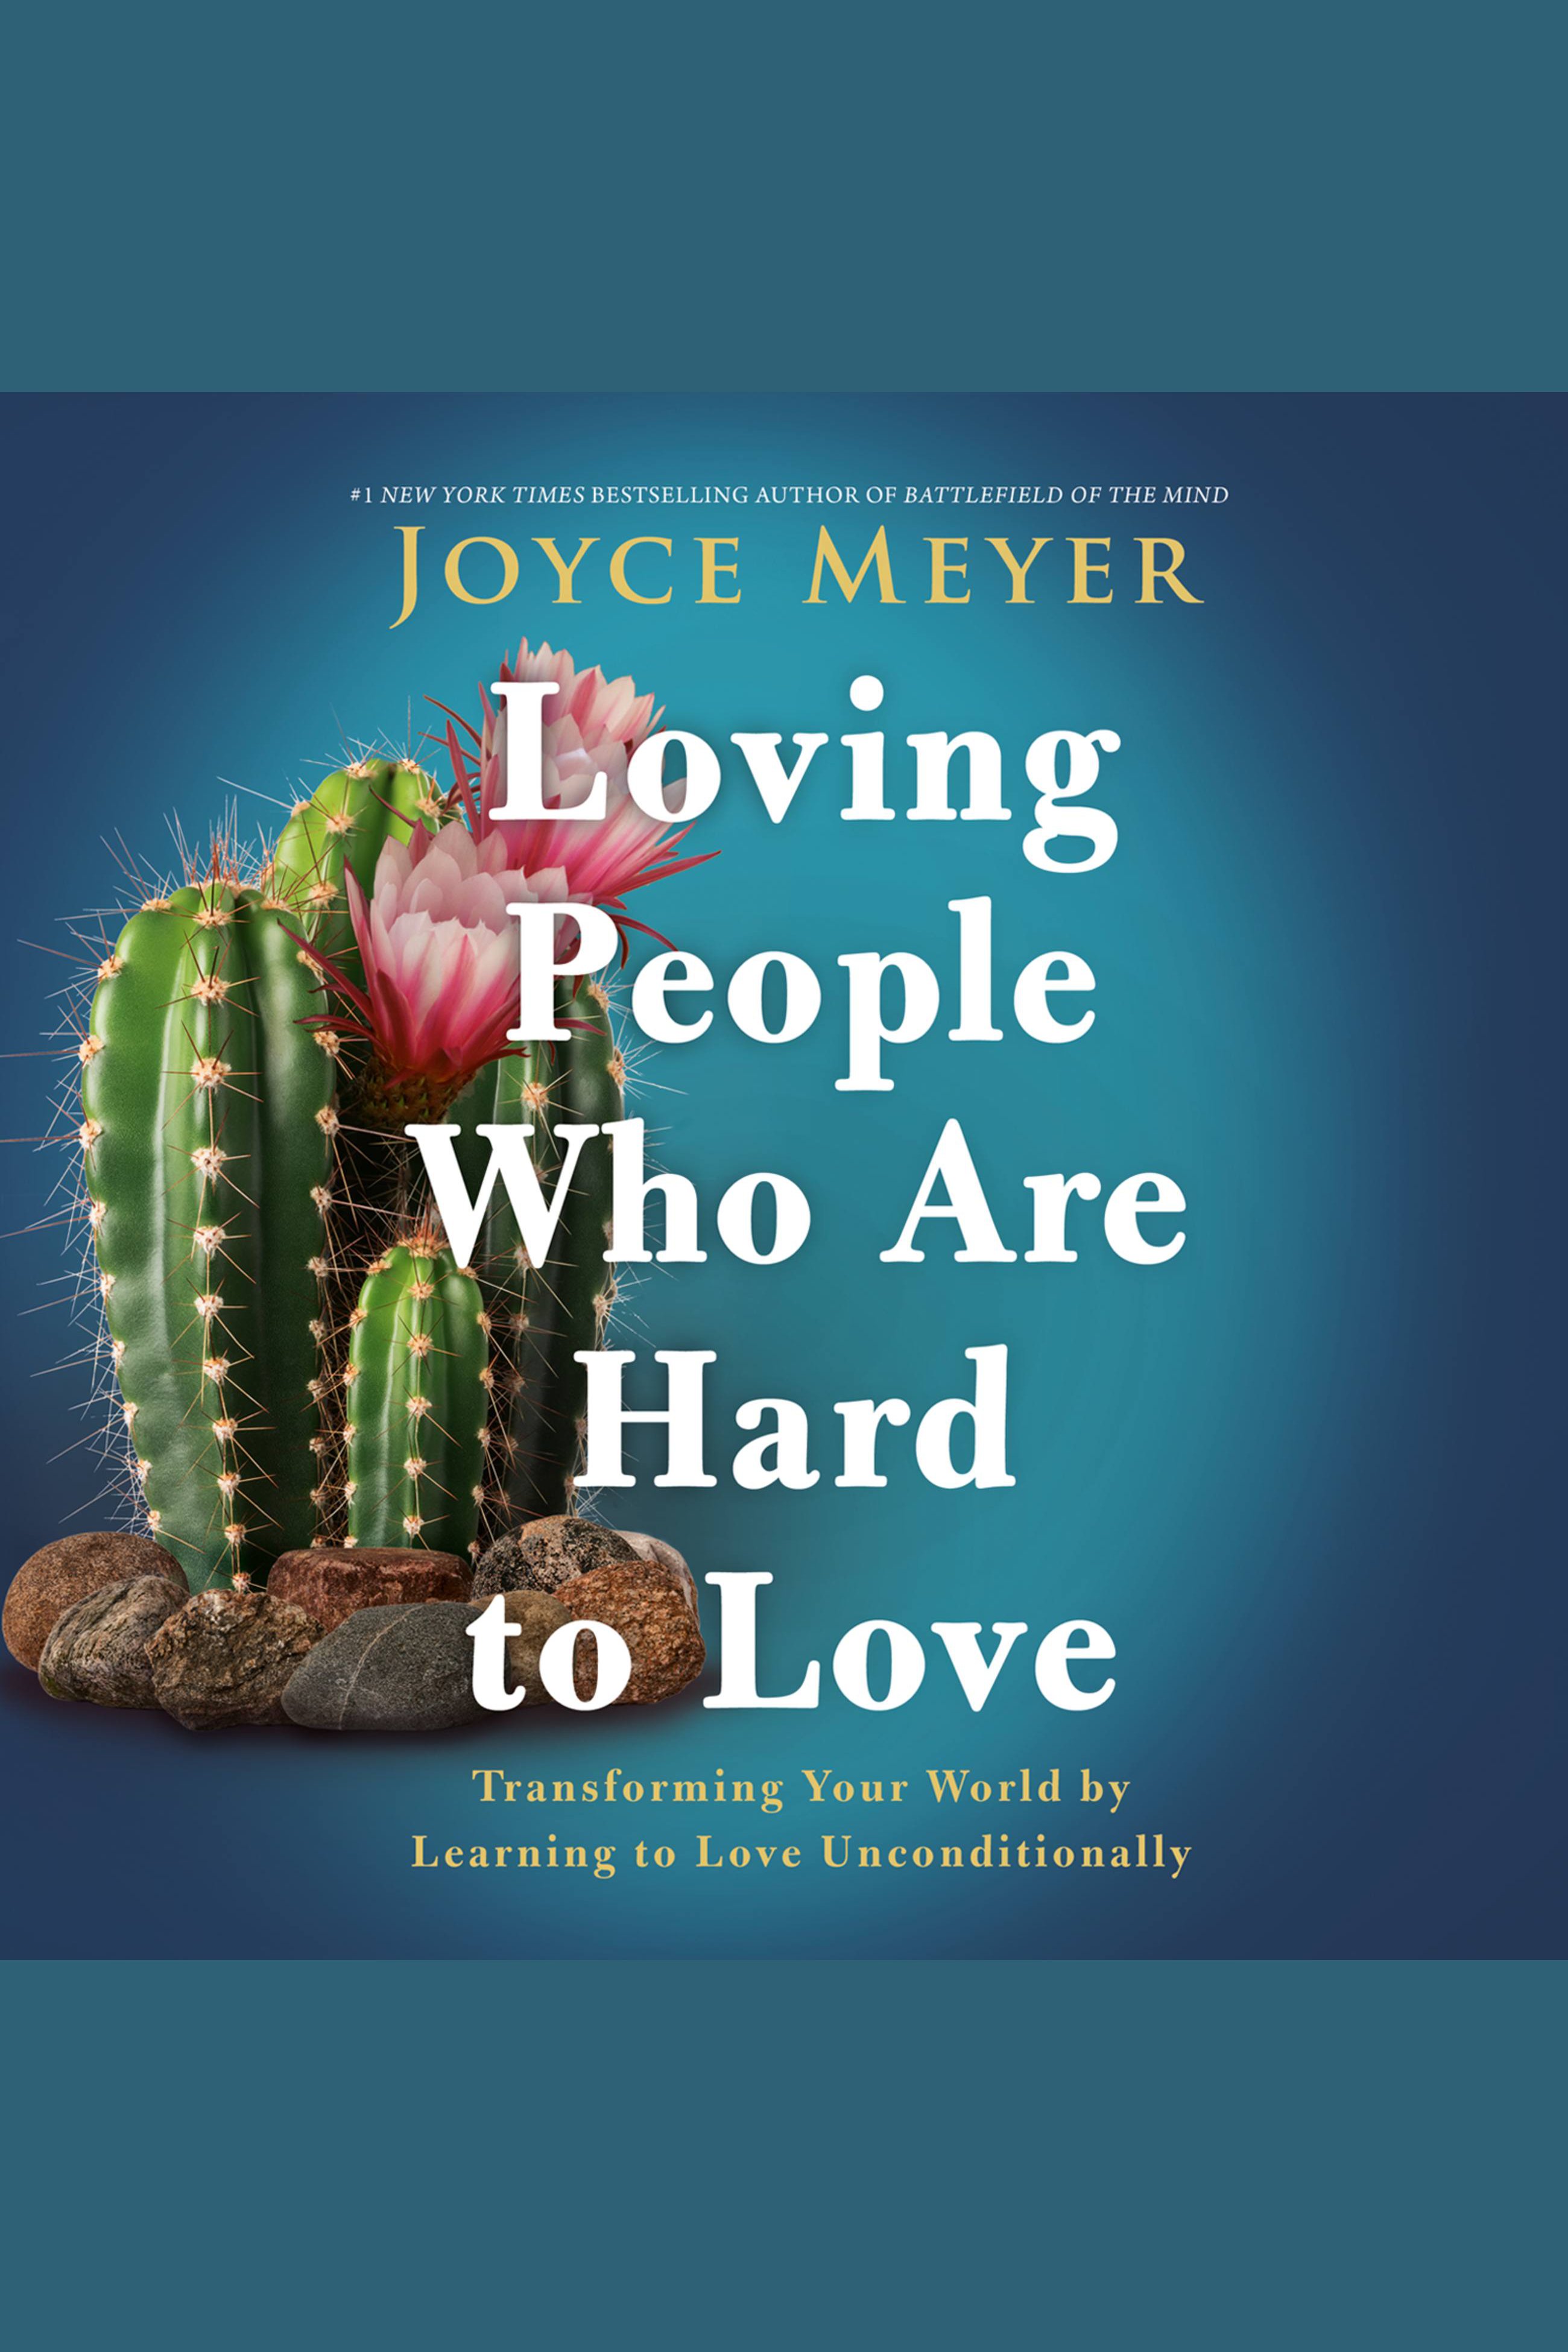 Umschlagbild für Loving People Who Are Hard to Love [electronic resource] : Transforming Your World by Learning to Love Unconditionally